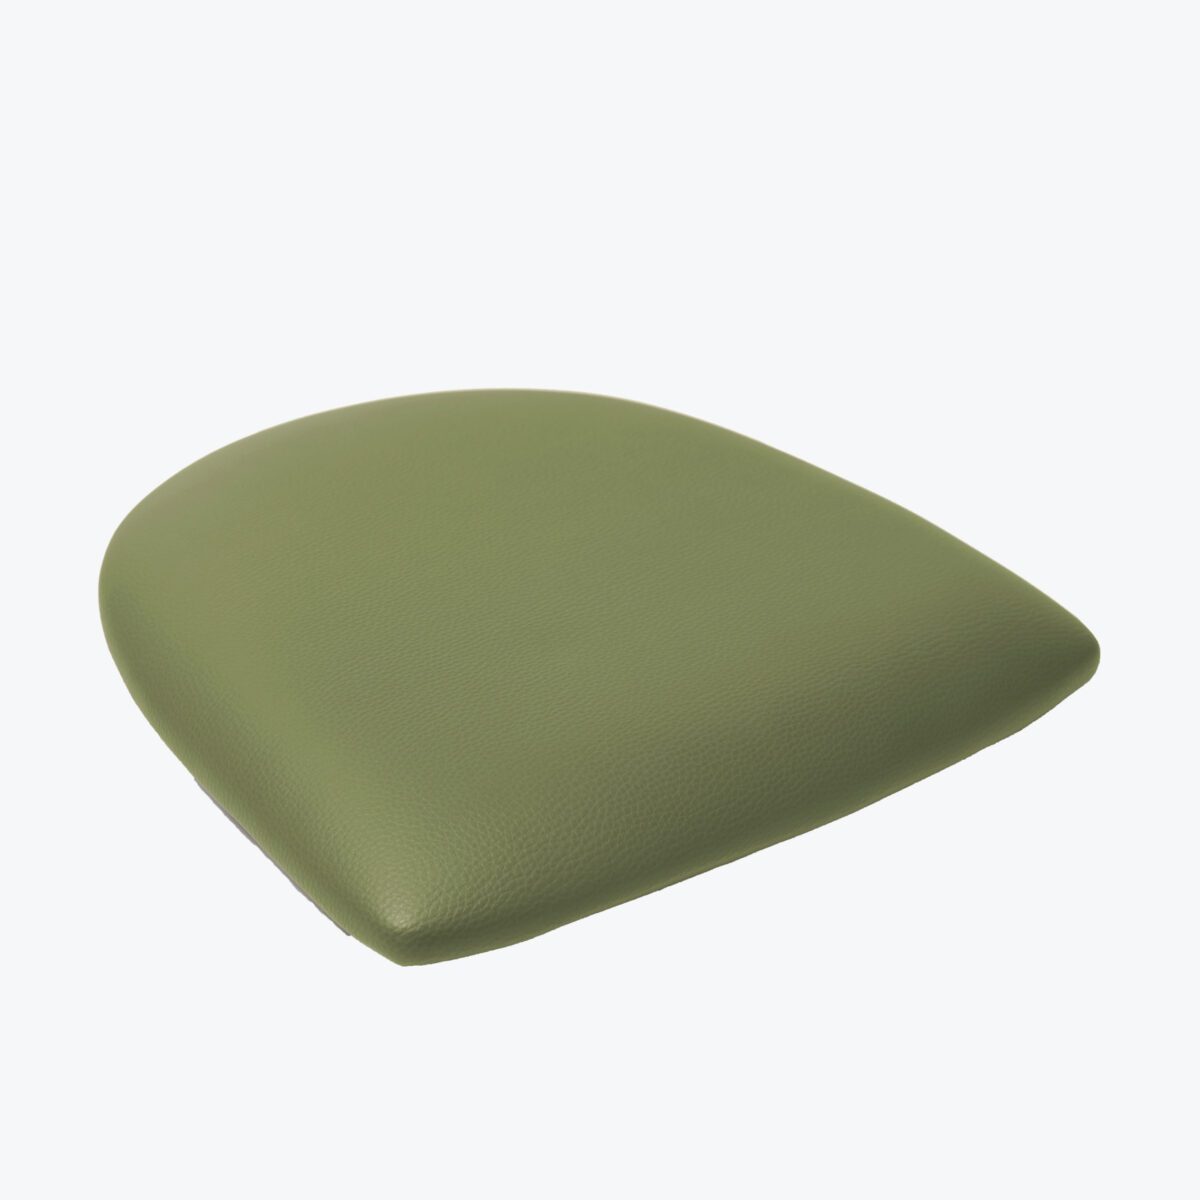 63 ASSISE OLIVE 9430